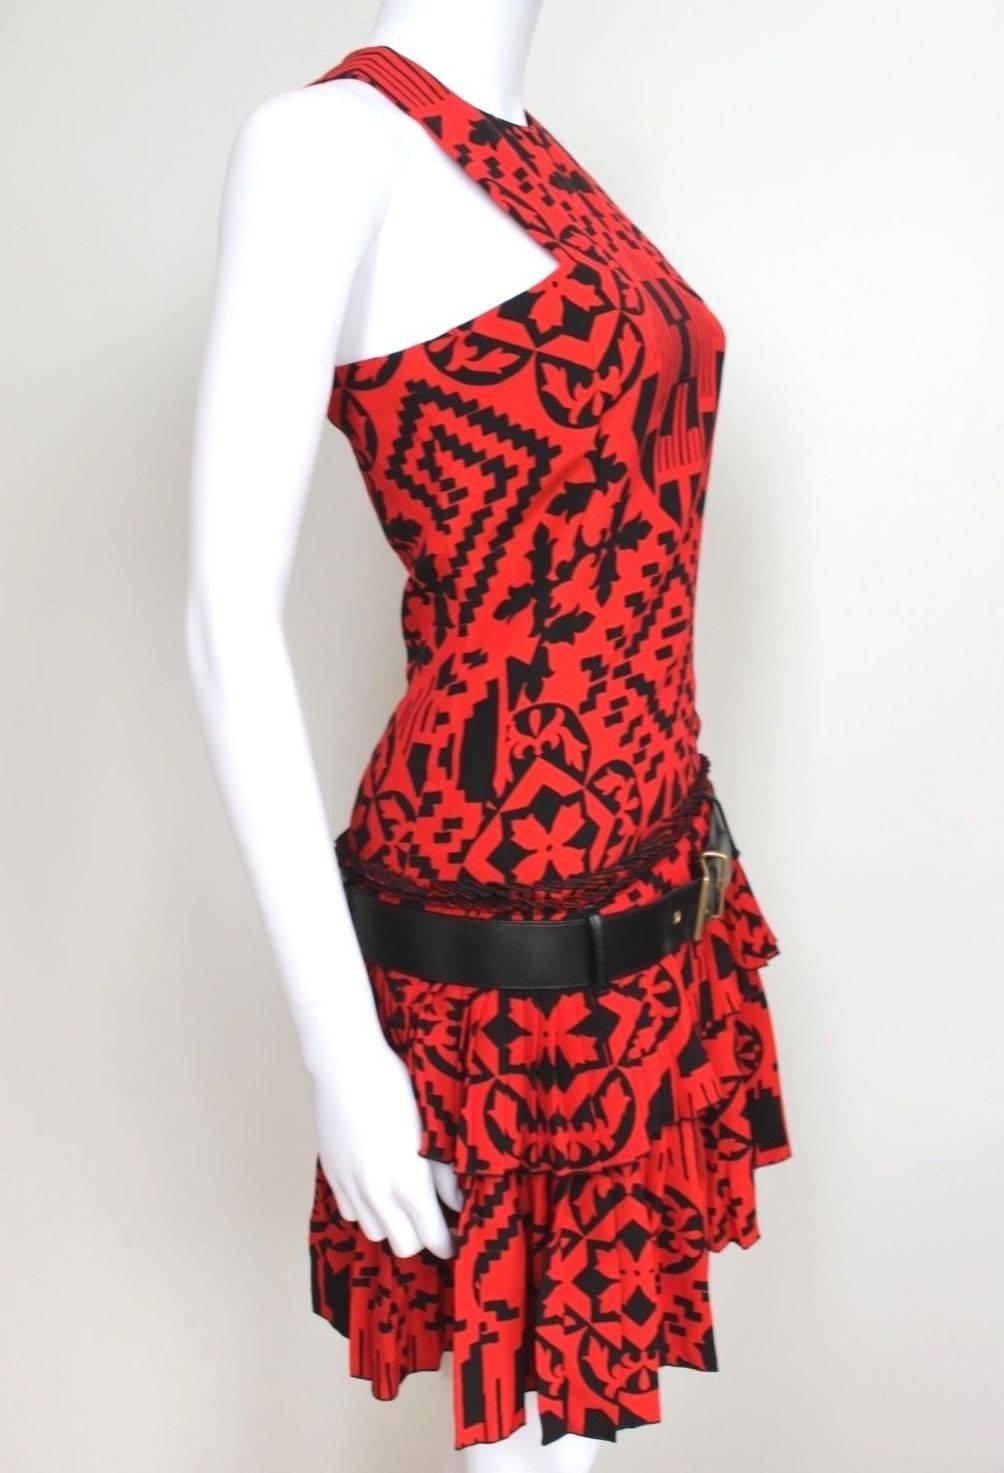 New Alexander McQueen Resort 2014 Red Print Pleated dress 38 uk 6-8
Amazing dress From Alexander McQueen featuring bold black and red print, dropped waist black belt with pleated layered skirt 
Crew neck and fitted bodice, loose fitted skirt
60%